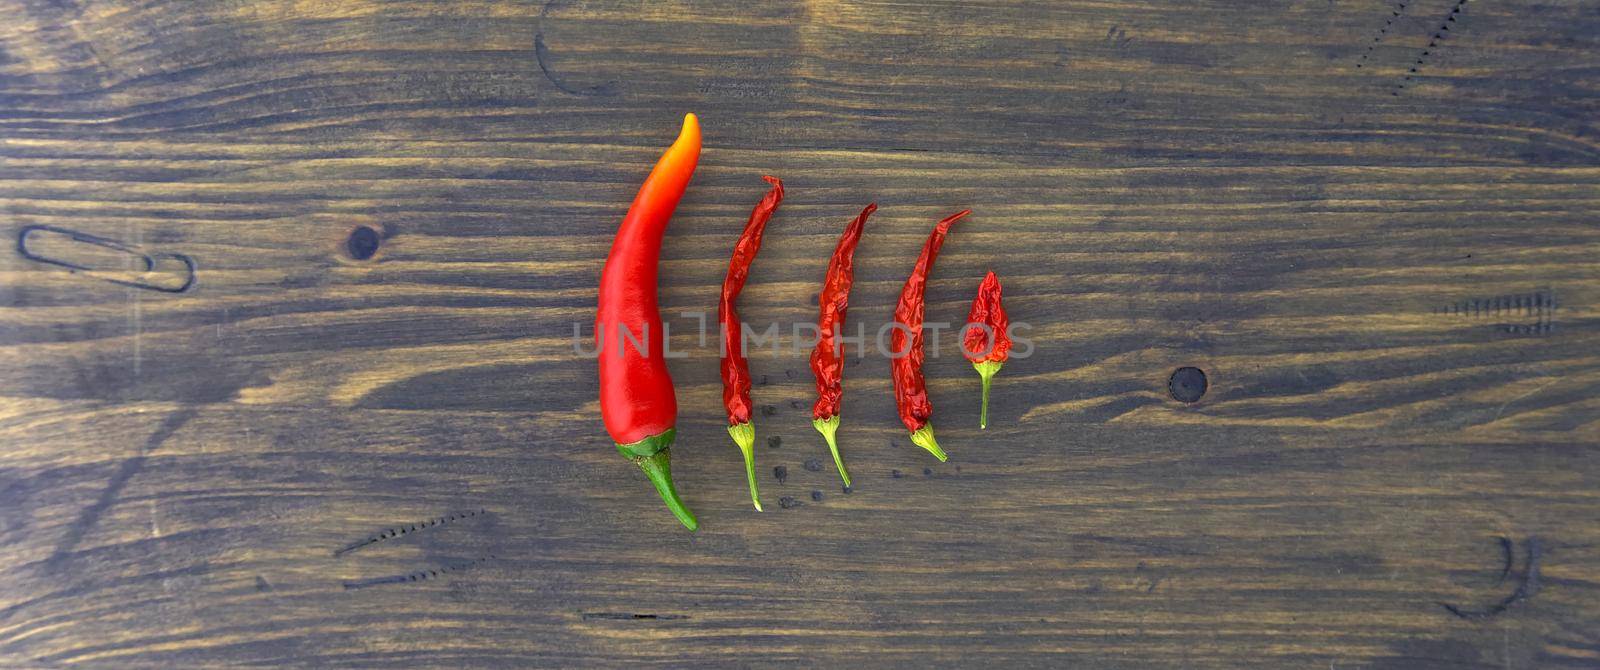 Hot chili pepper panorama still life over a wood background with a descending row of fresh and dried red chillies with copyspace